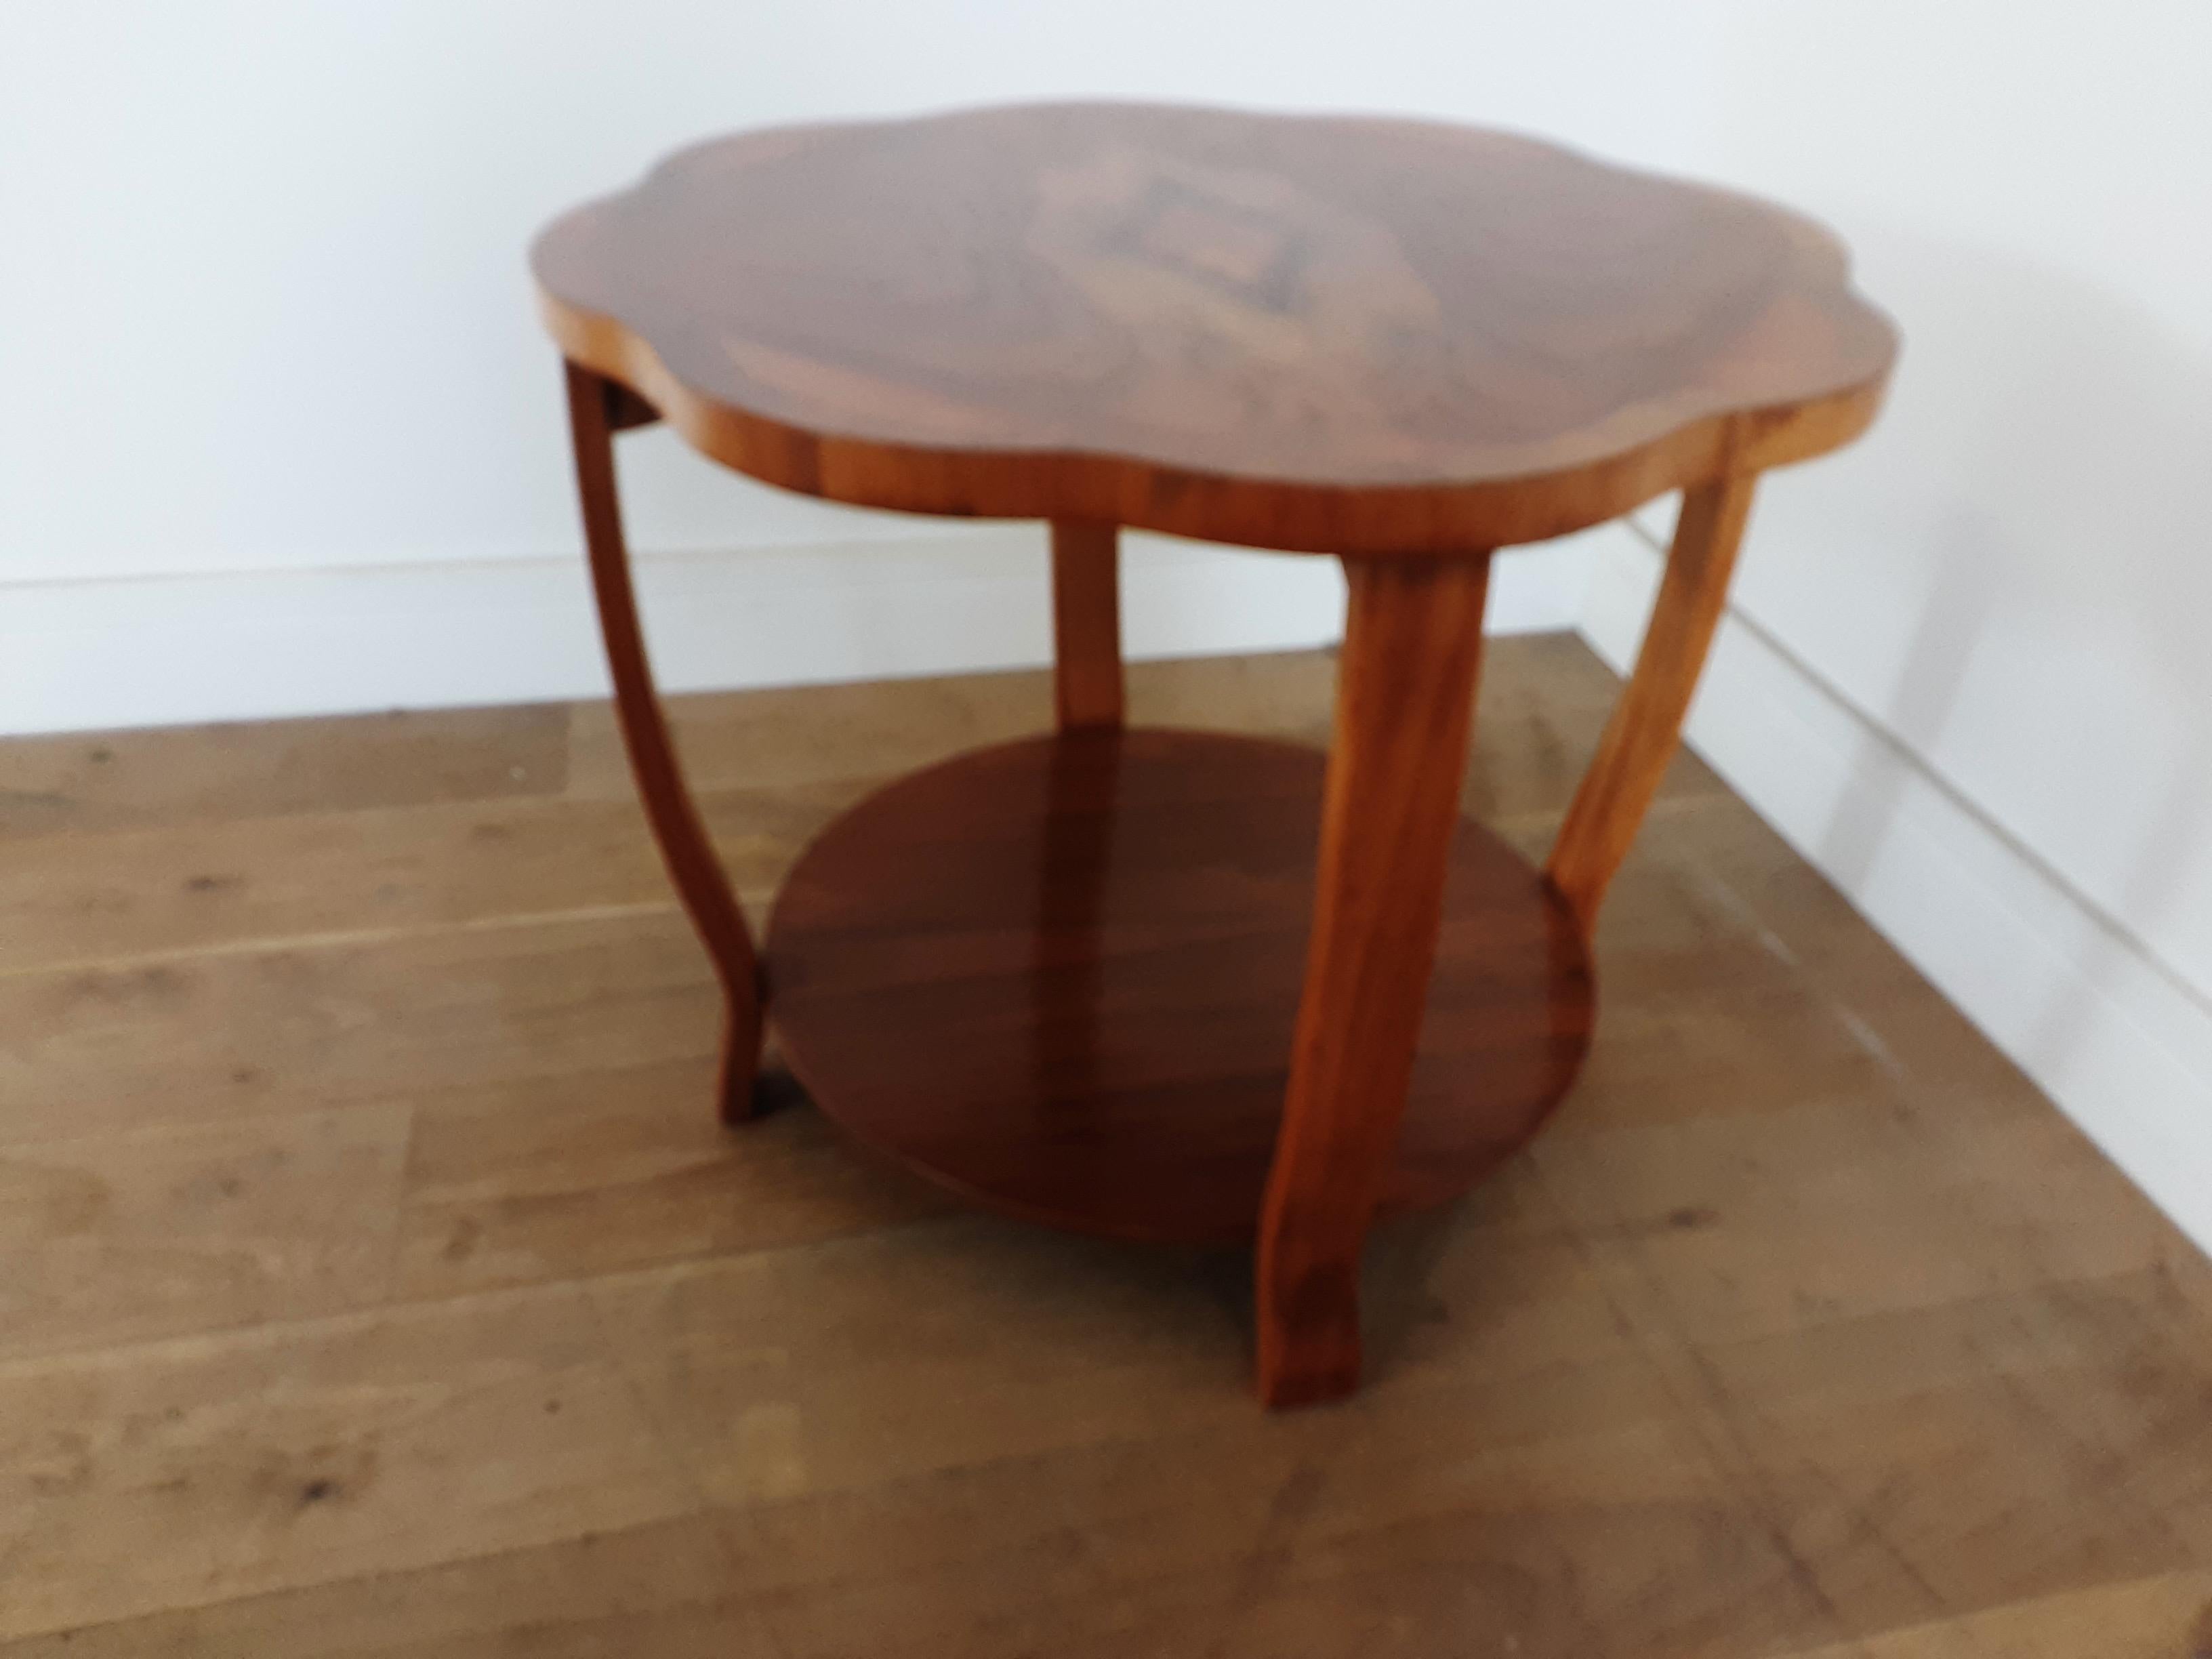 British Art Deco Figured Walnut Table with a Beautiful Scalloped Edge For Sale 1